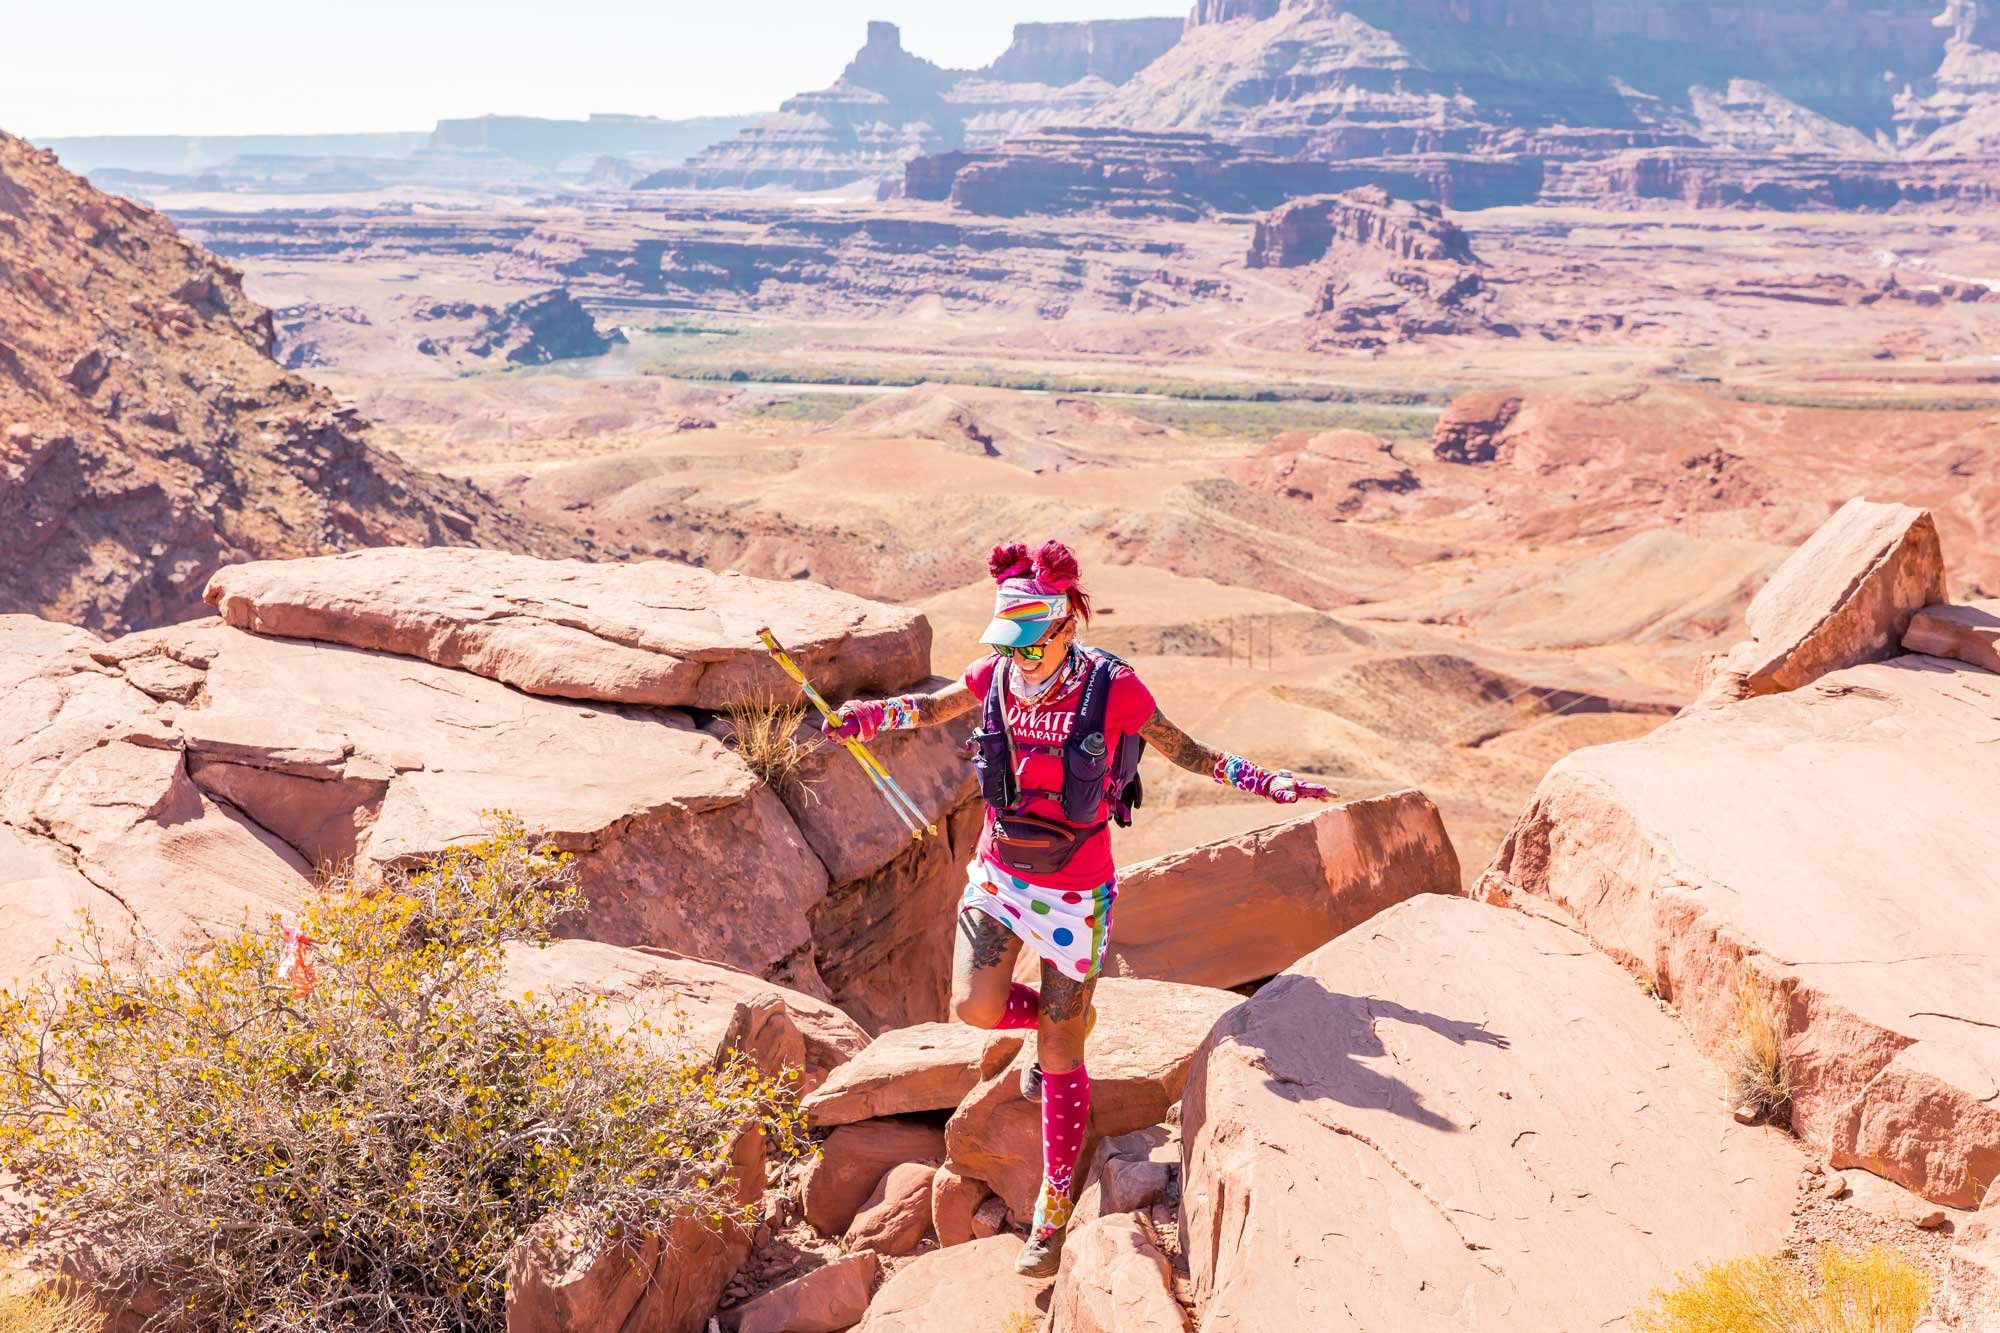  A colorfully dressed female runner at Jackson’s Ladder at Moab 240 